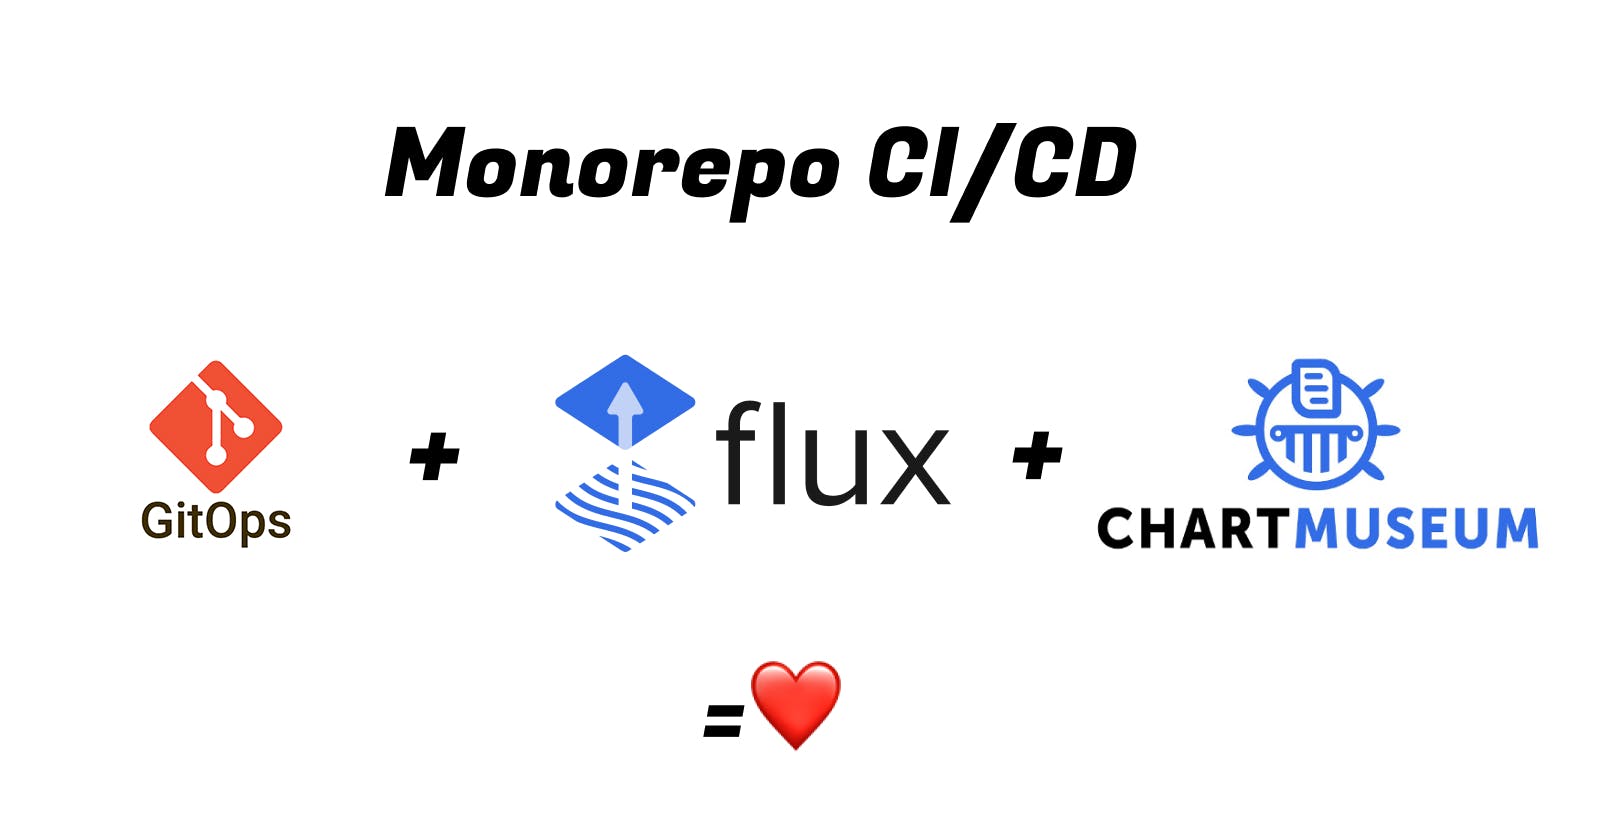 Monorepo CI/CD with GitOps, Flux and ChartMuseum